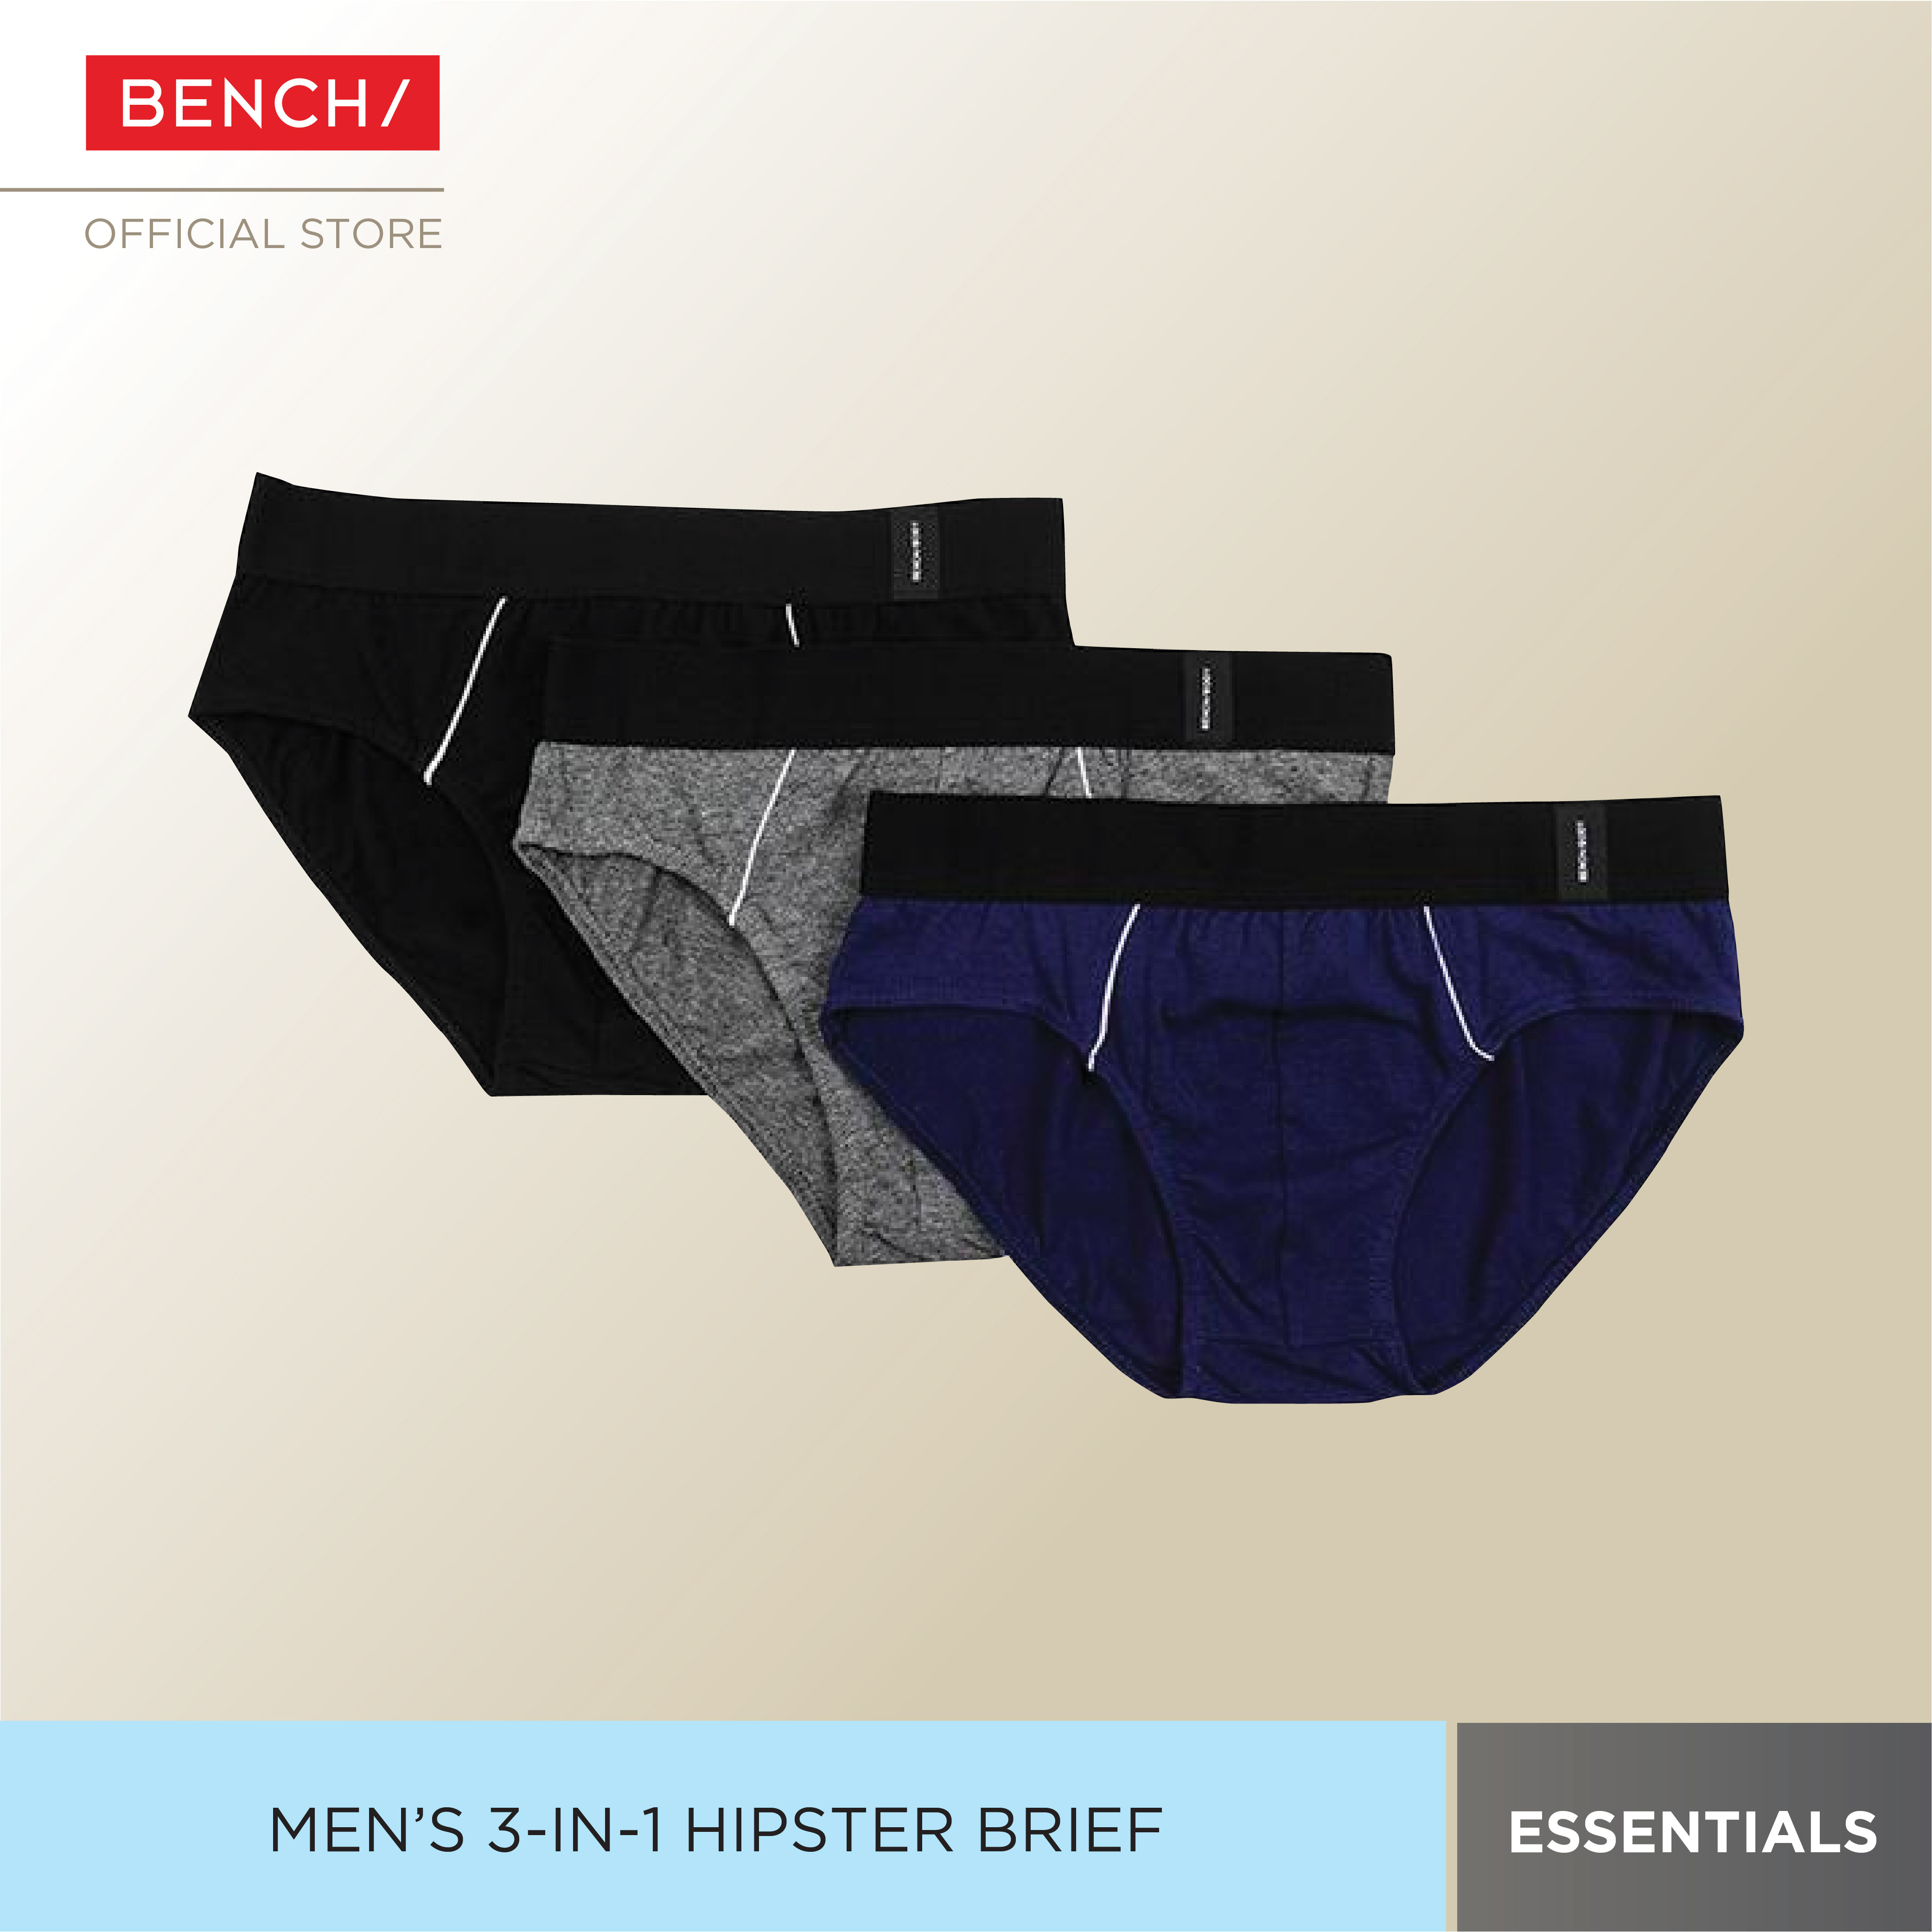 BENCH- TUB0310 Men's 3-in-1 Pack Hipster Brief